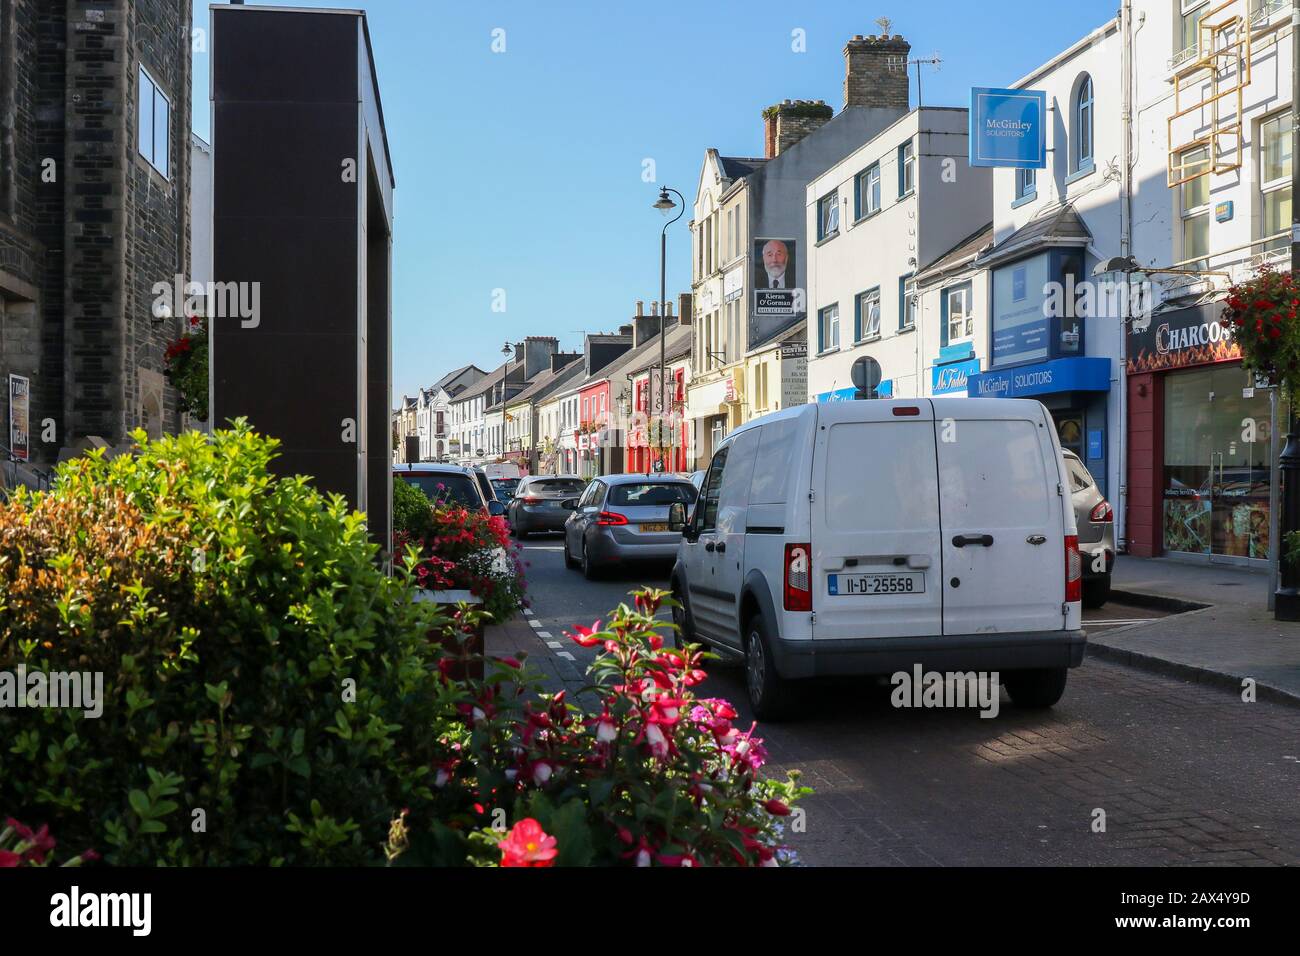 A white van parked in a line of traffic in a narrow one-way street on a sunny autumn morning with blue sky in Letterkenny County Donegal, Ireland., Stock Photo